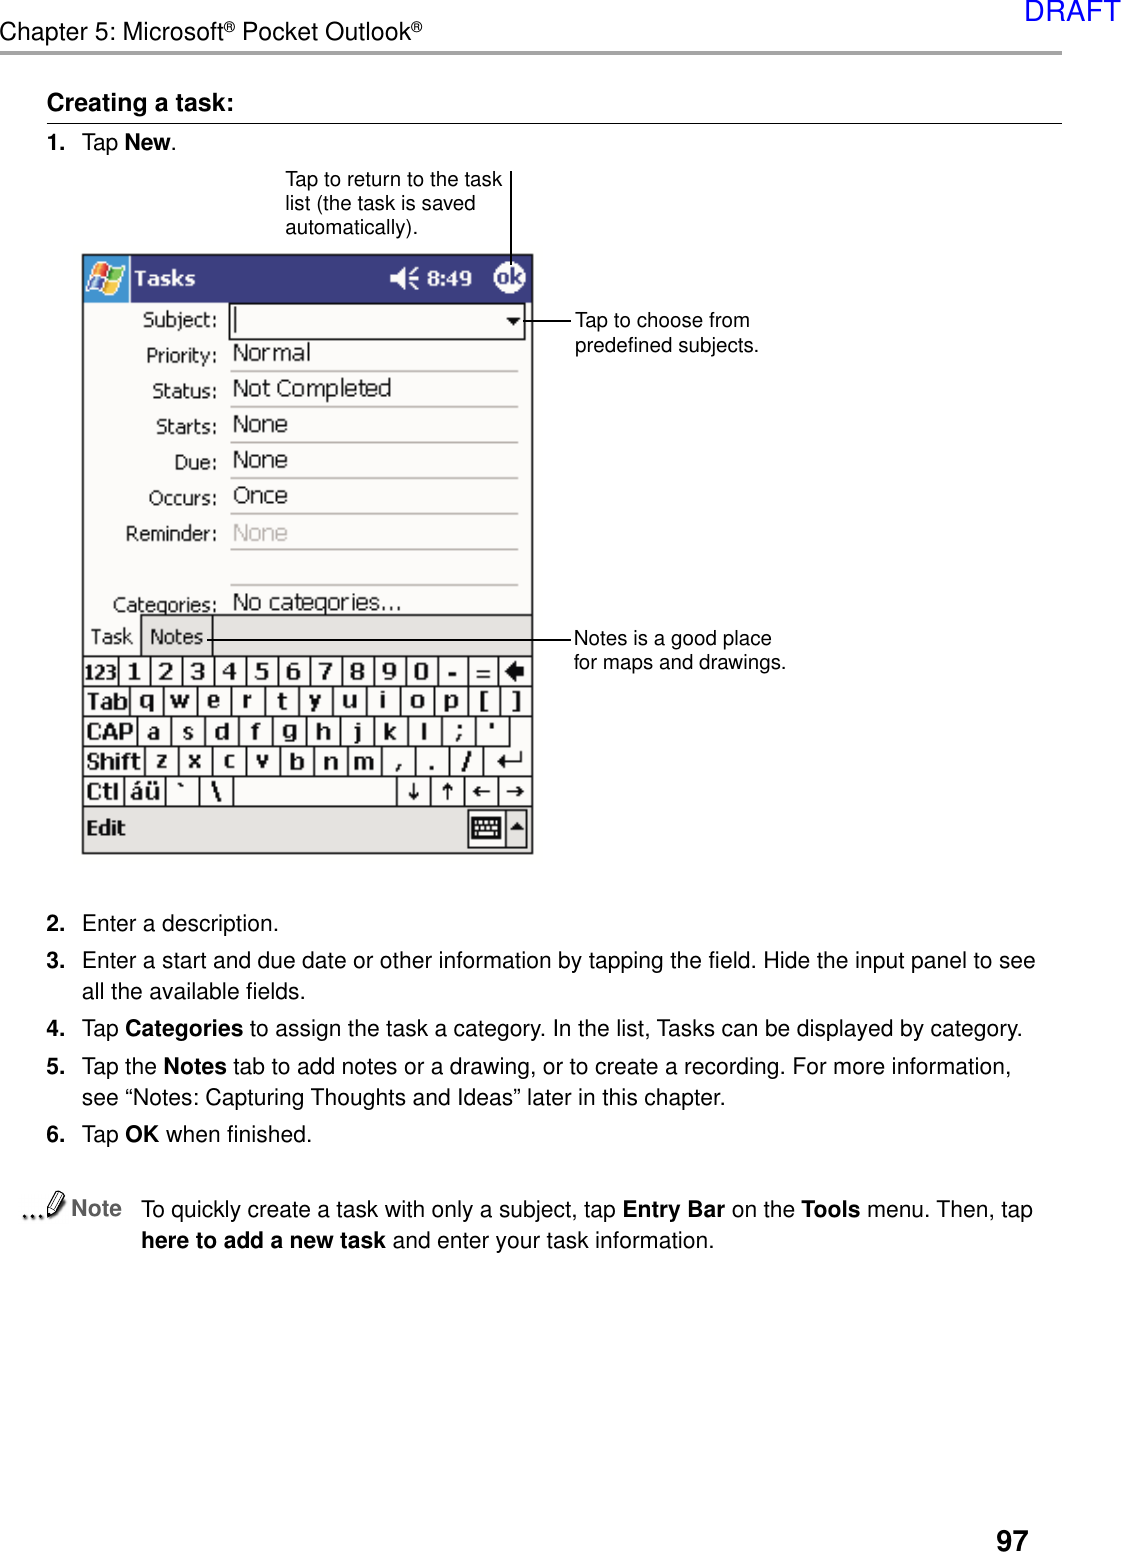 97Chapter 5: Microsoft® Pocket Outlook®Creating a task:1. Tap New.2. Enter a description.3. Enter a start and due date or other information by tapping the field. Hide the input panel to seeall the available fields.4. Tap Categories to assign the task a category. In the list, Tasks can be displayed by category.5. Tap the Notes tab to add notes or a drawing, or to create a recording. For more information,see “Notes: Capturing Thoughts and Ideas” later in this chapter.6. Tap OK when finished.NoteTo quickly create a task with only a subject, tap Entry Bar on the Tools menu. Then, taphere to add a new task and enter your task information.Tap to return to the tasklist (the task is savedautomatically).Tap to choose frompredefined subjects.Notes is a good placefor maps and drawings.DRAFT